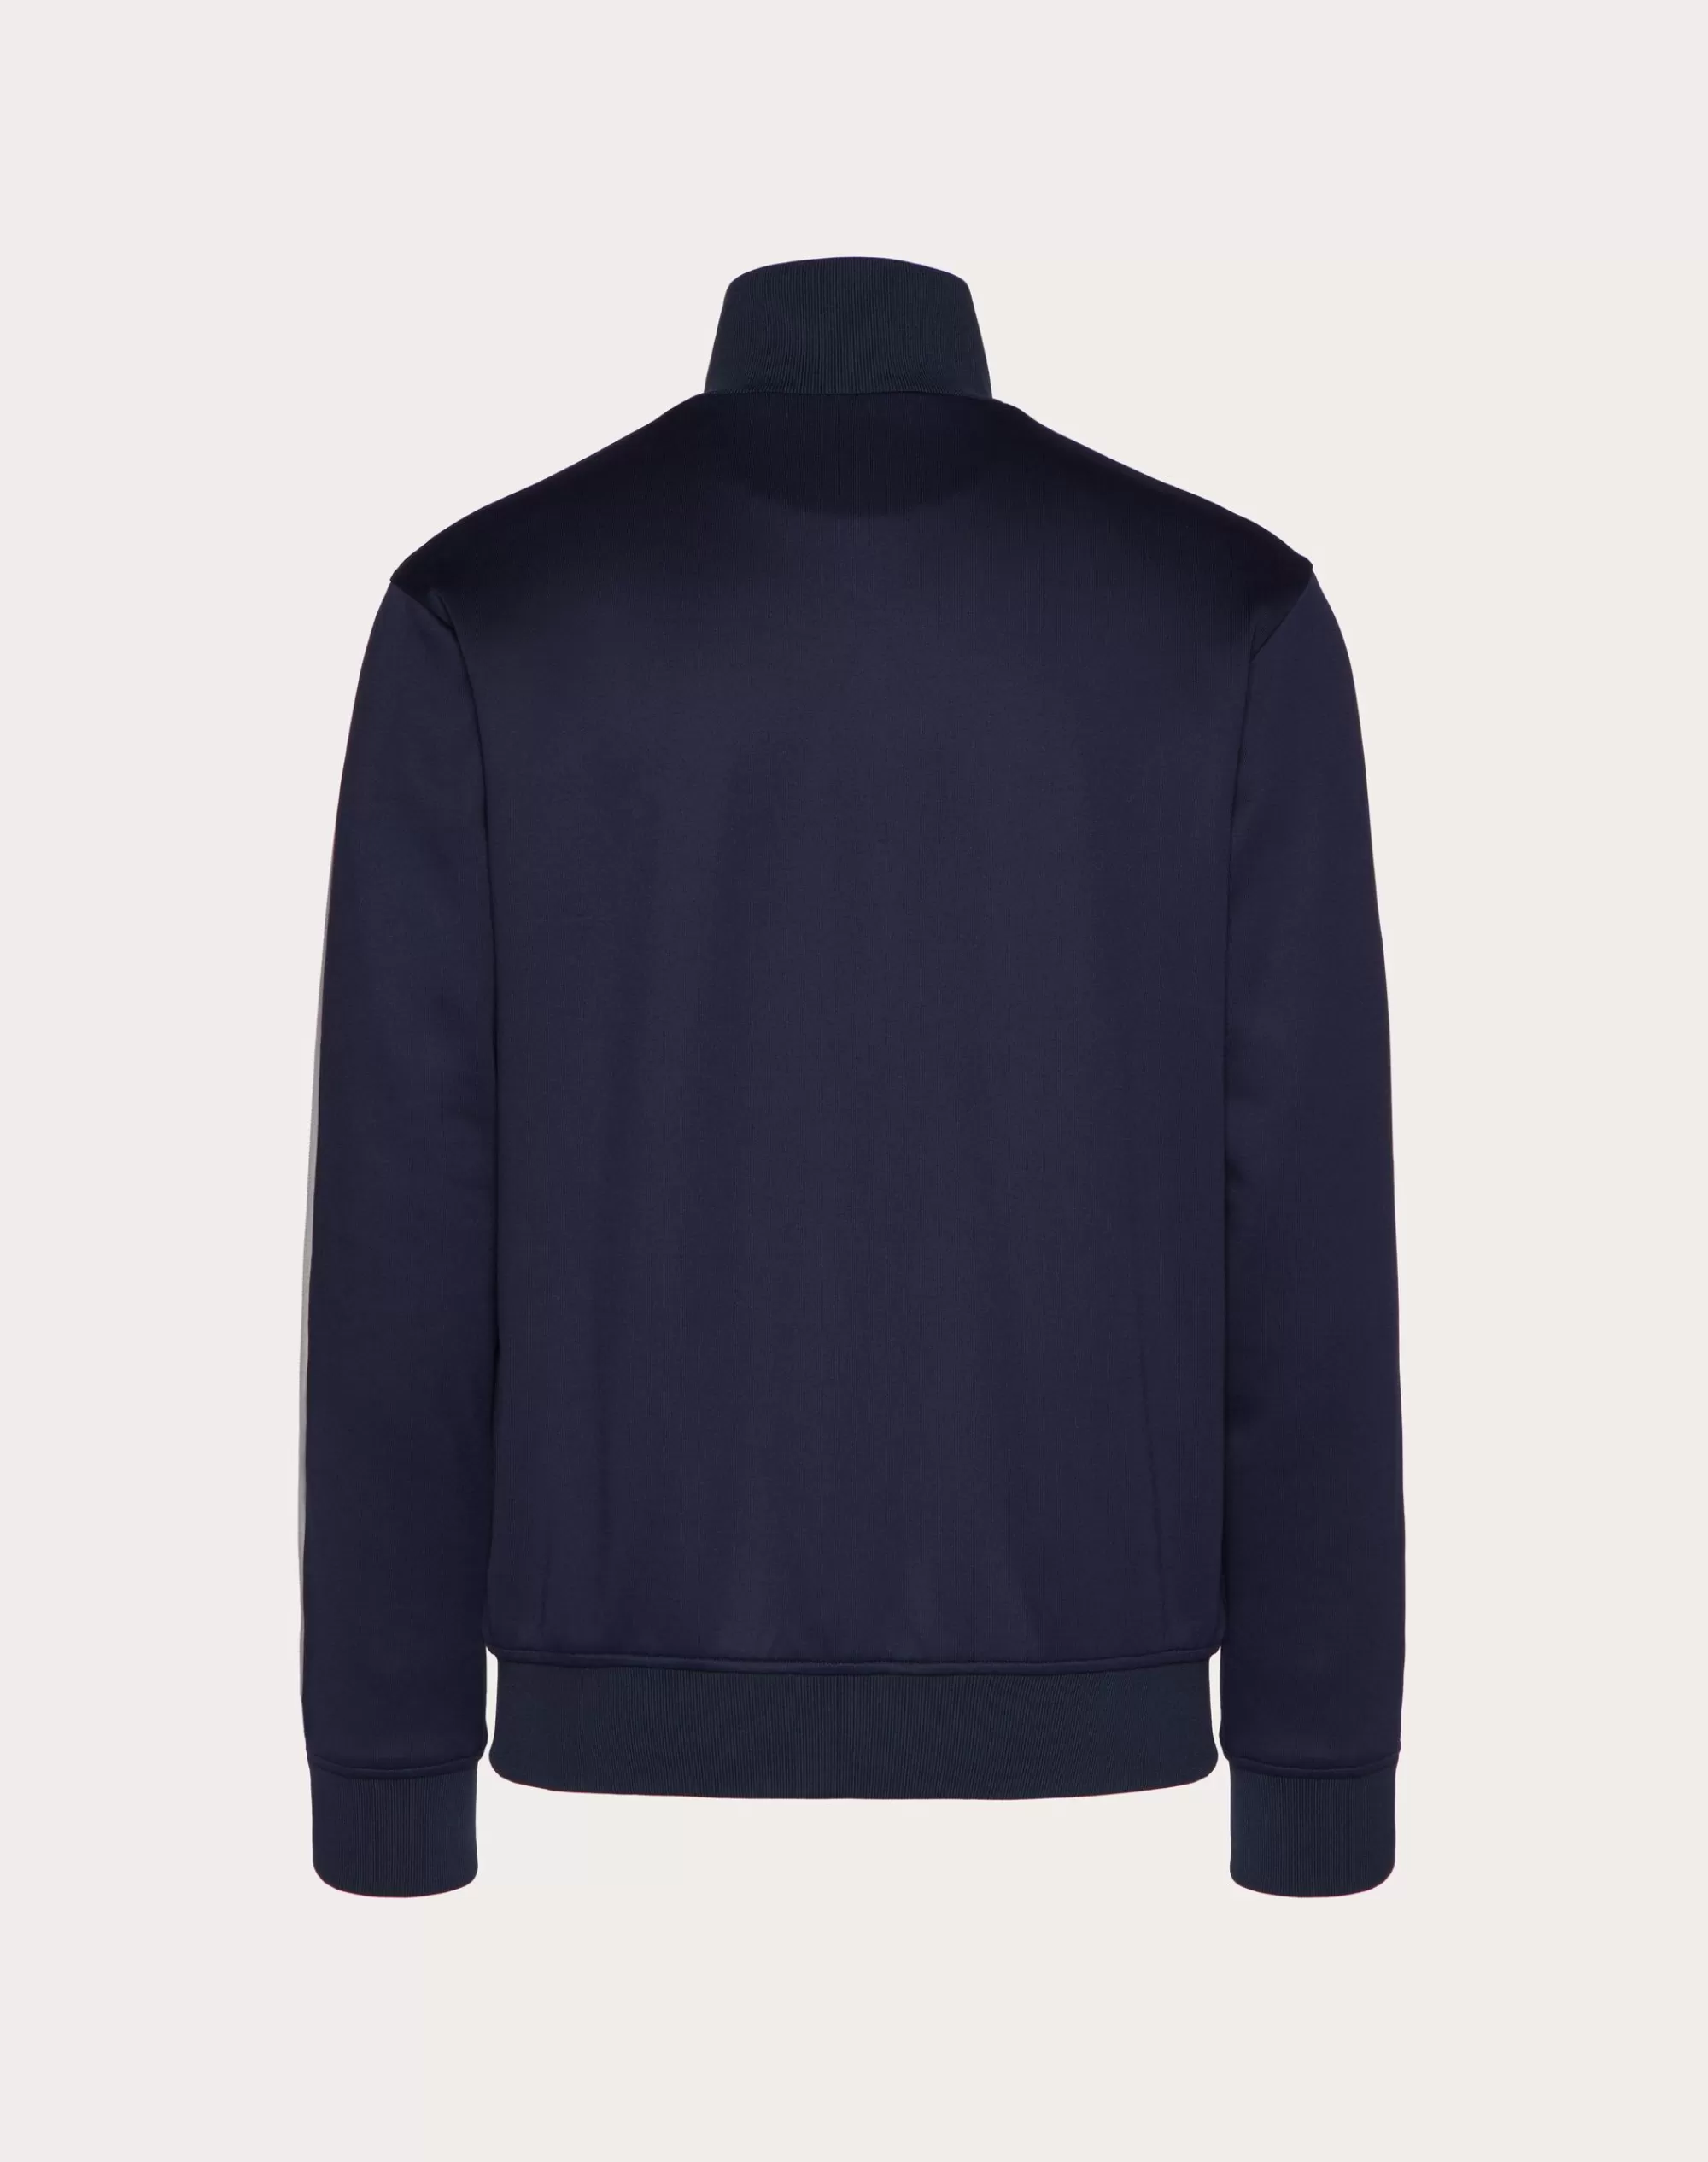 Valentino HIGH-NECK ACETATE SWEATSHIRT WITH ZIPPER AND VLOGO SIGNATURE PATCH Navy Outlet